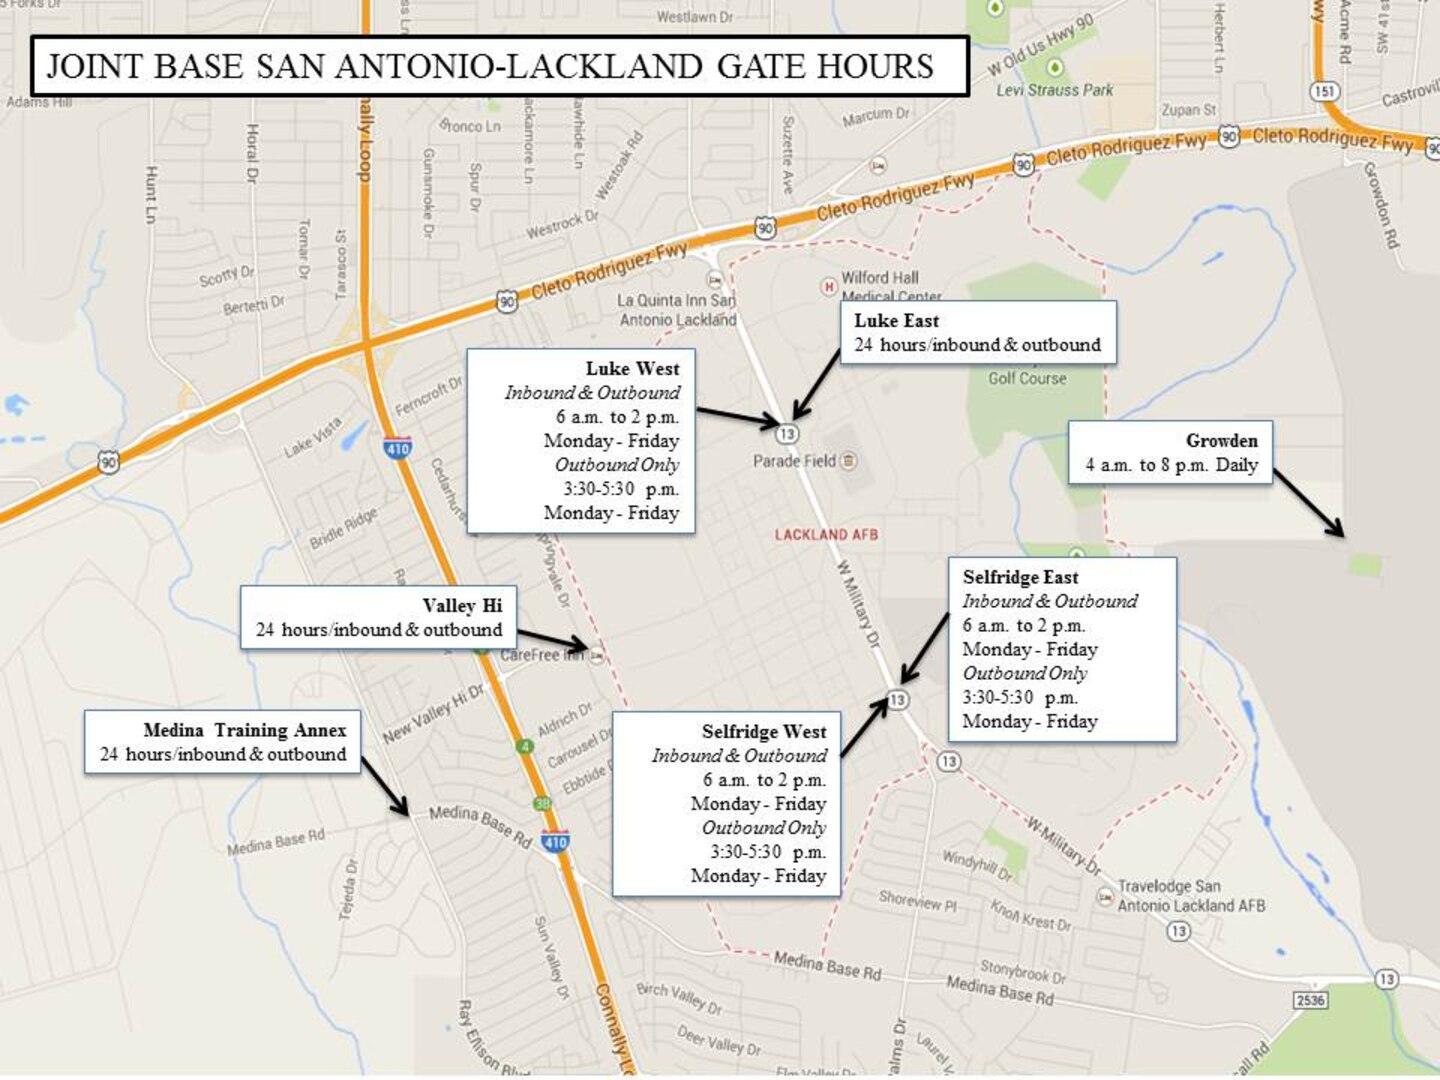 Joint Base San Antonio-Lackland Gate Hours, current as of May 8, 2014. 